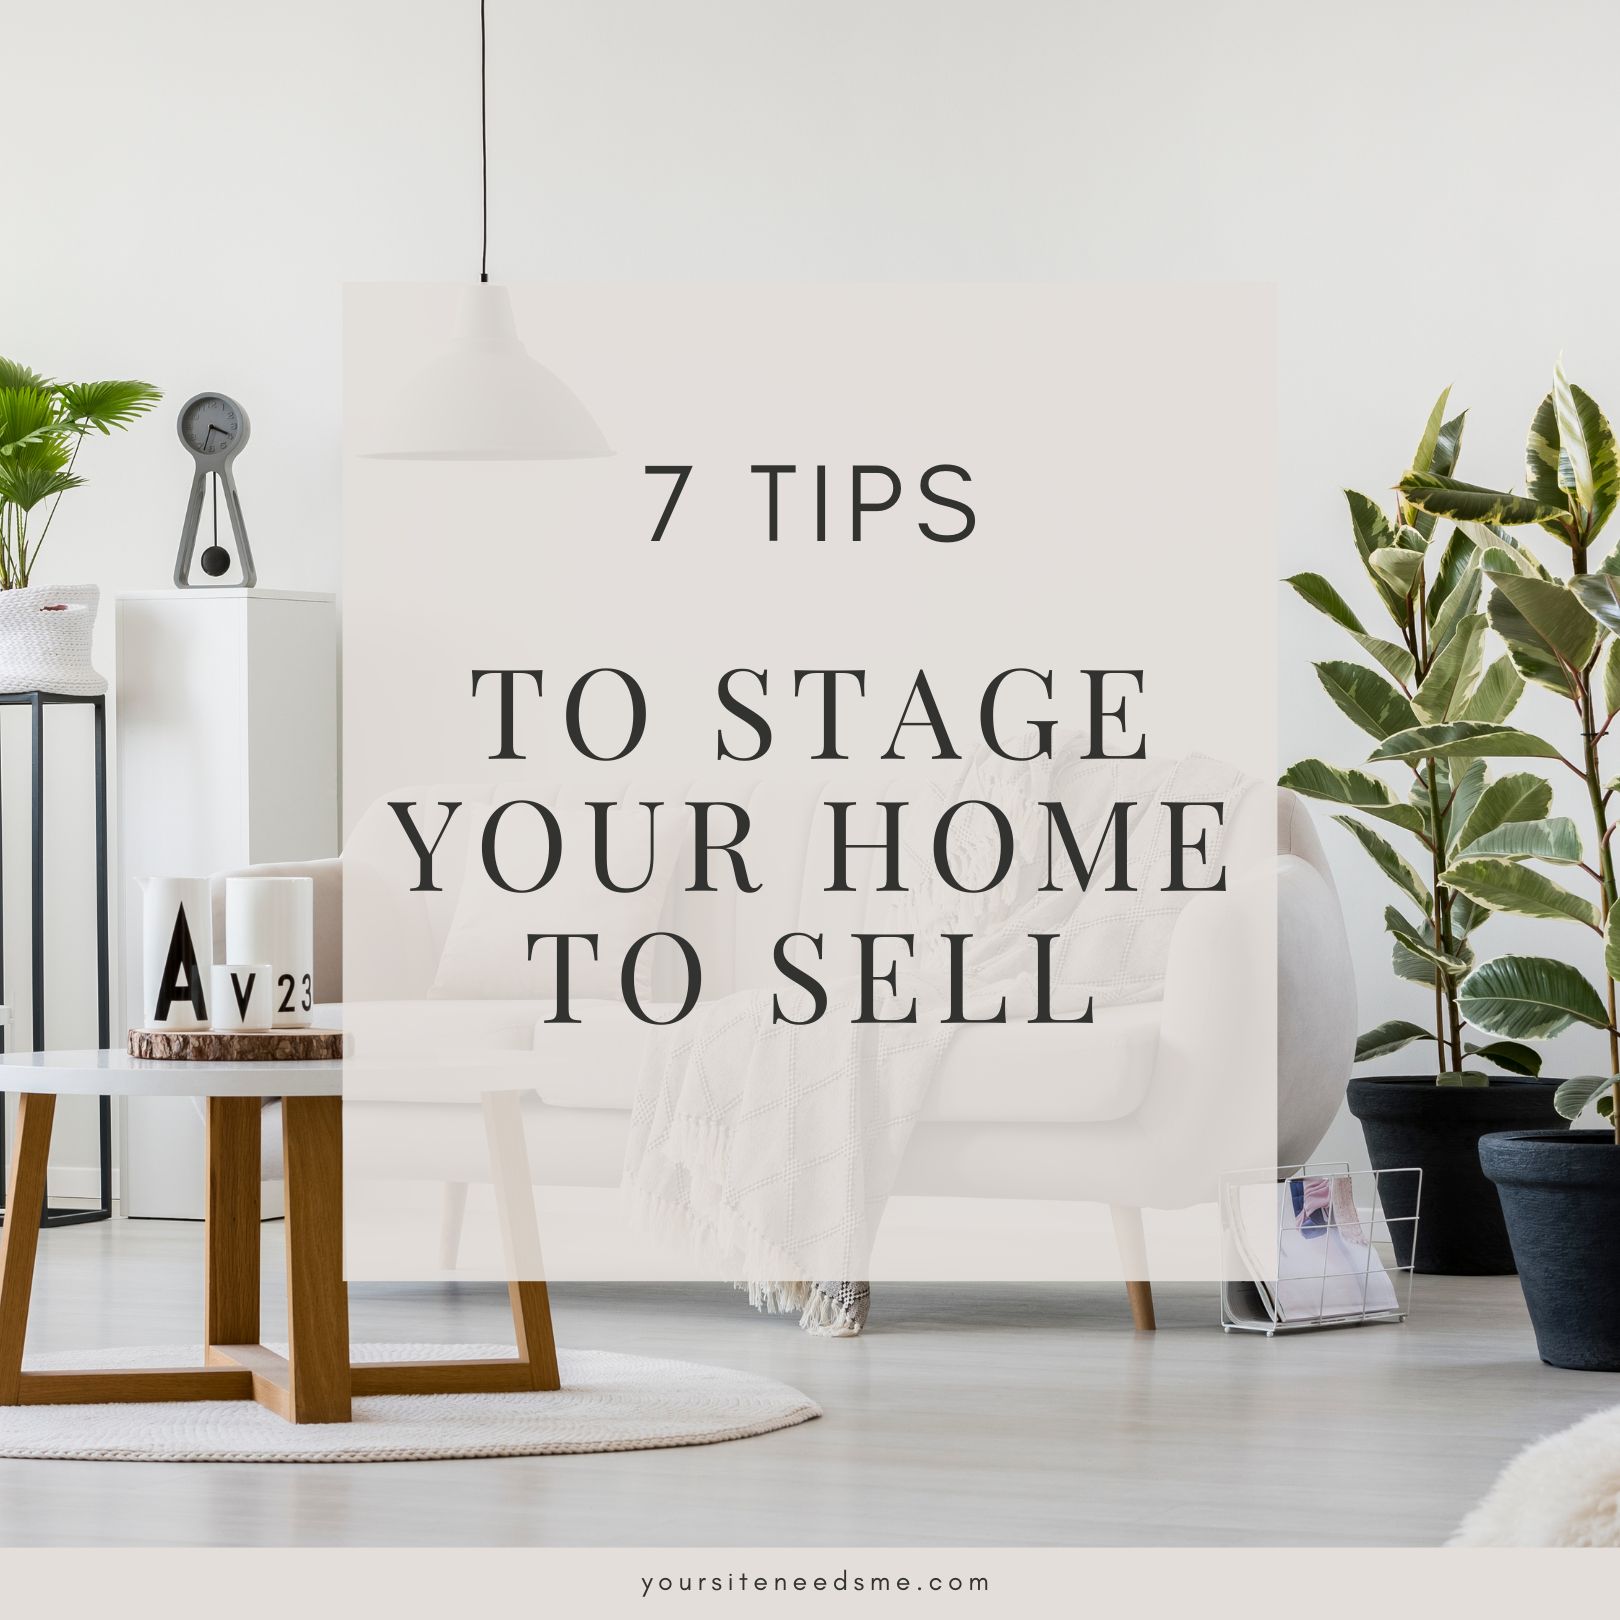 7 tips to stage your home to sell